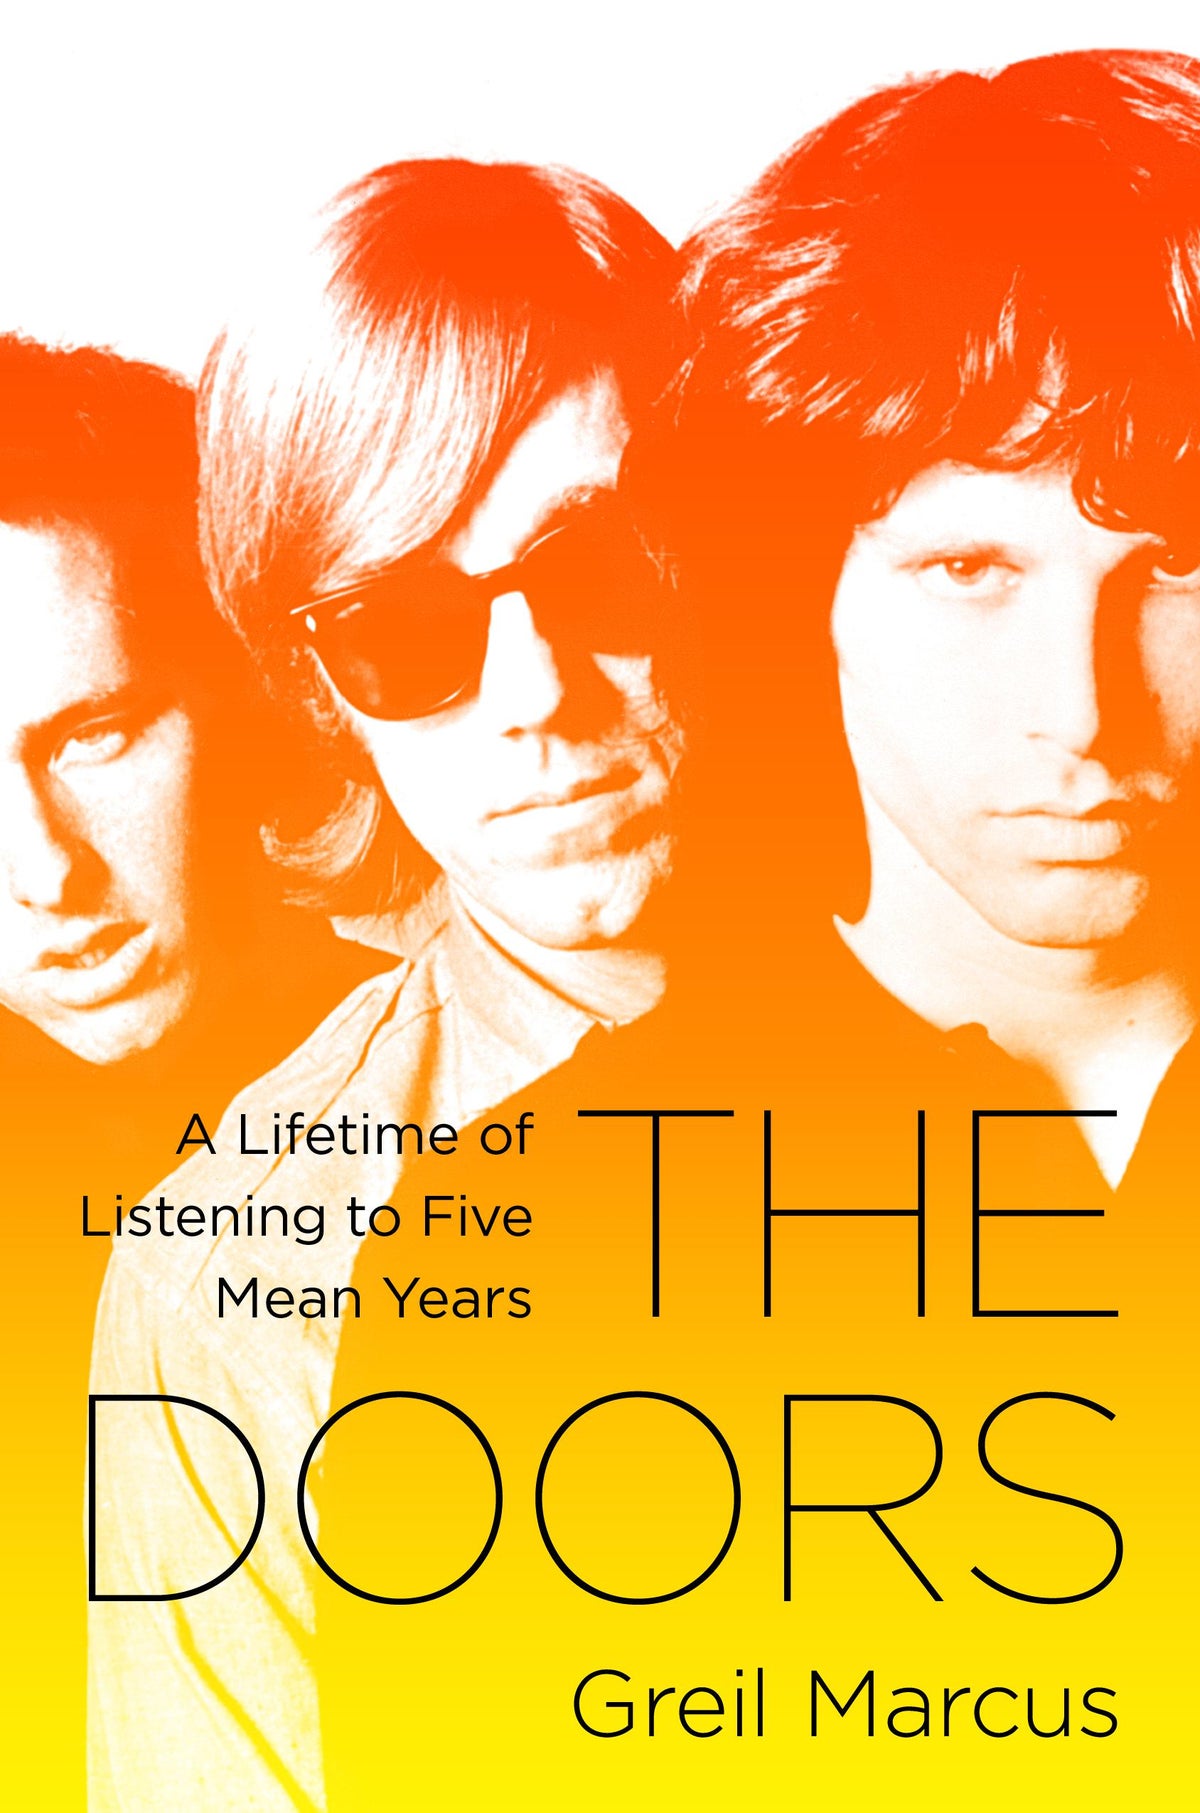 Light My Fire: A Classic Rock Salute to The Doors - Wikipedia